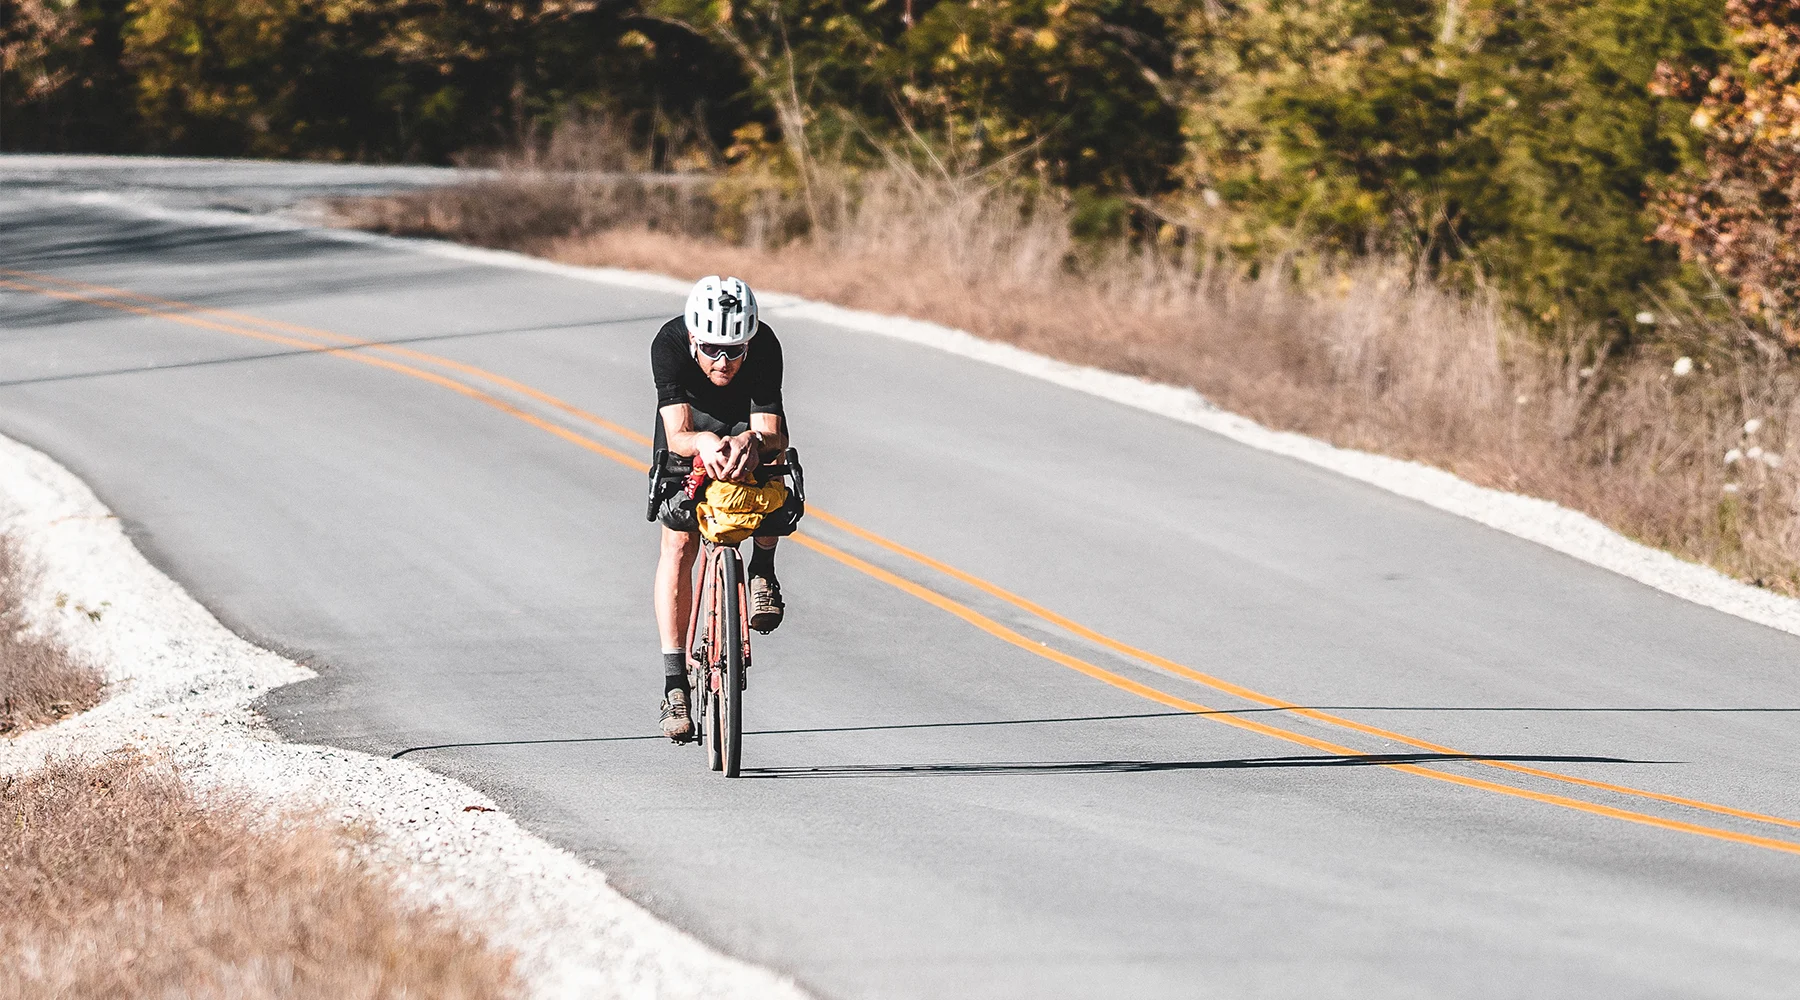 Physiological Data of Winning a 1,000-Mile Bikepack Race in Under 5 Days